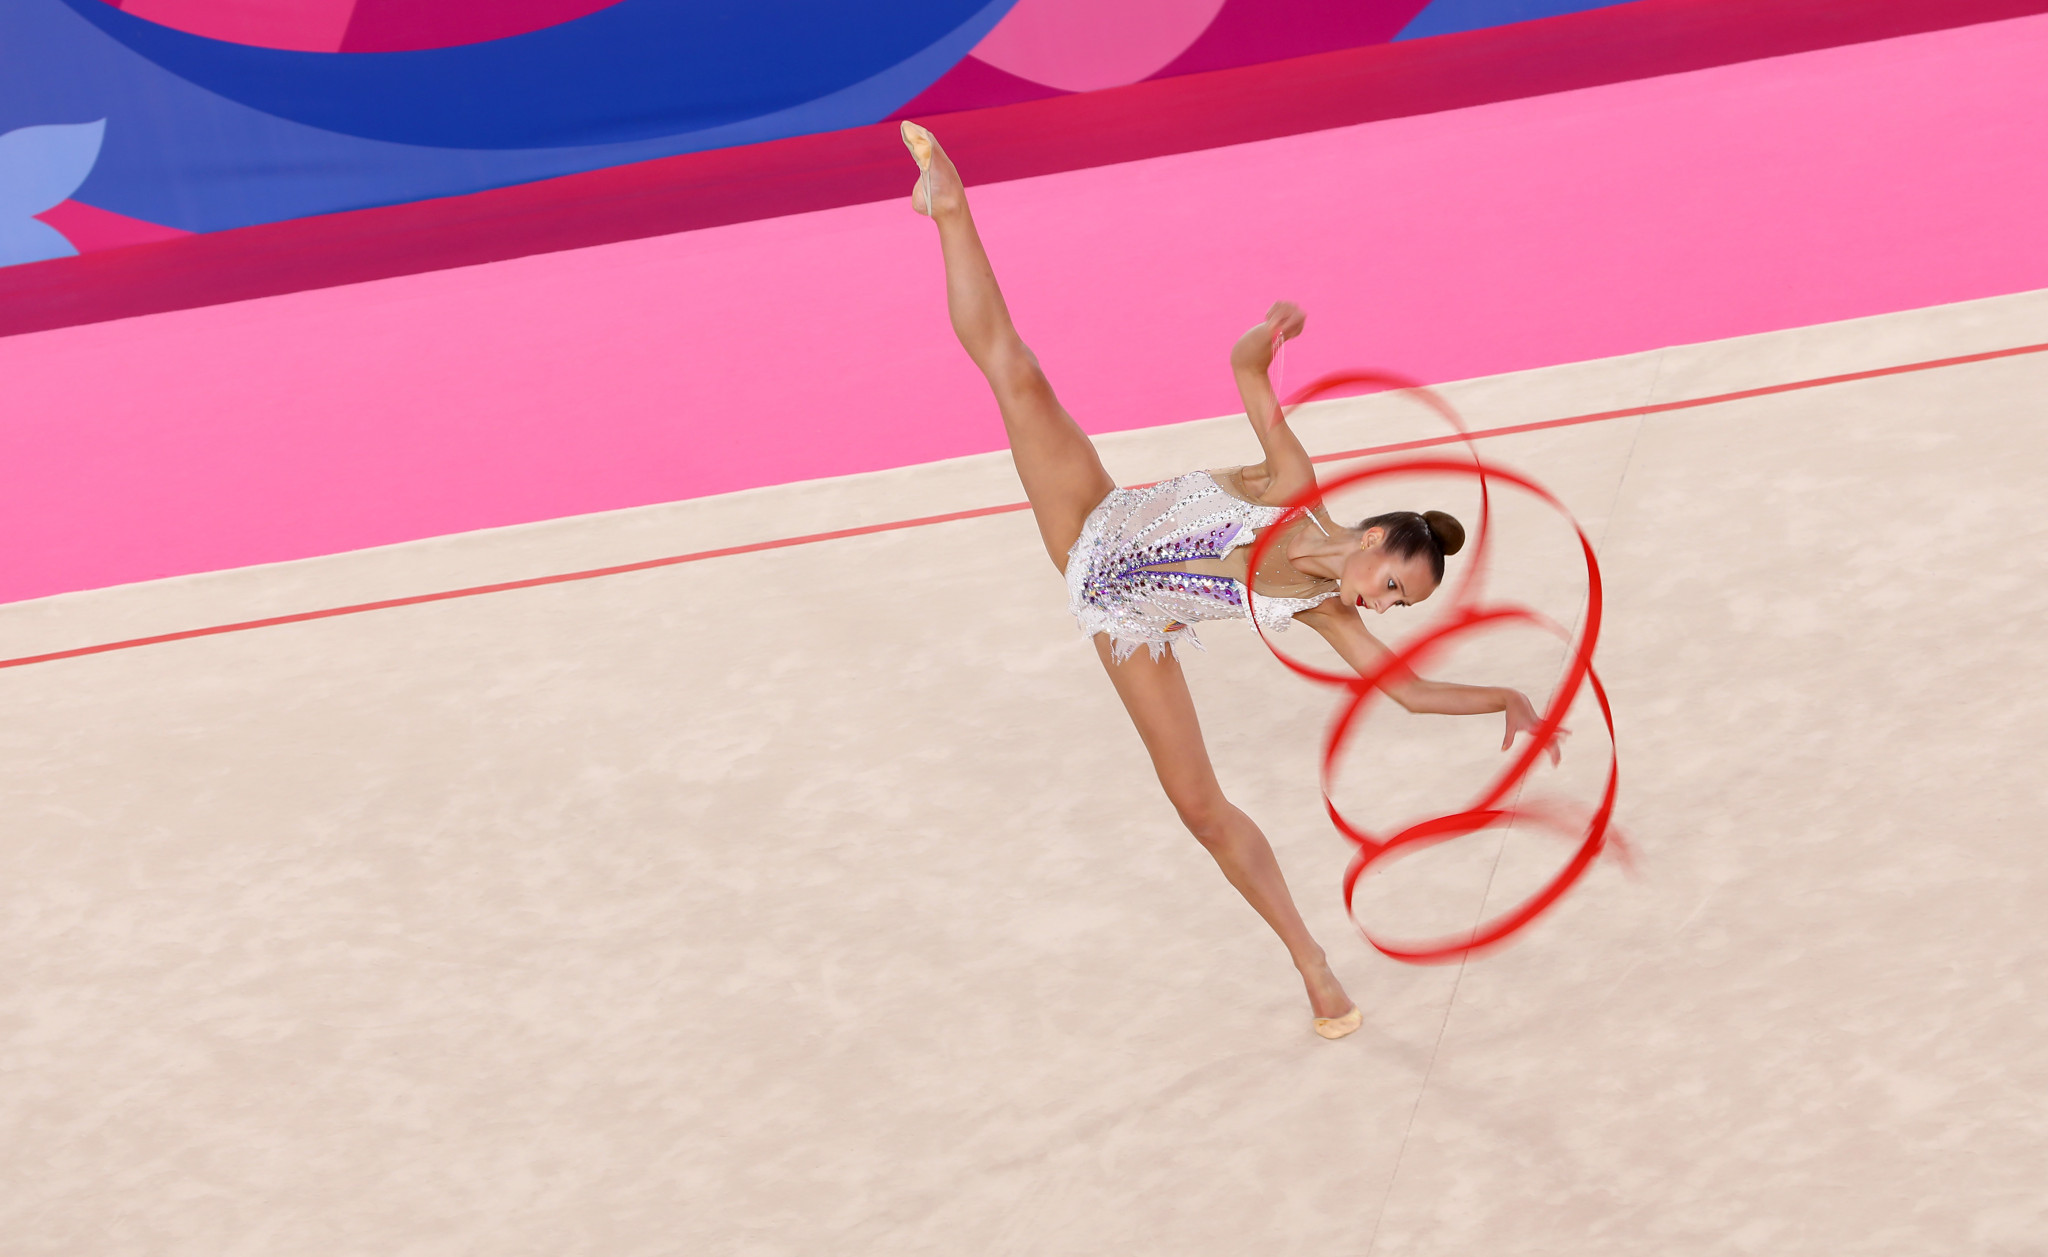 Rhythmic gymnastics titles were on offer on day eight of Lima 2019 ©Getty Images 